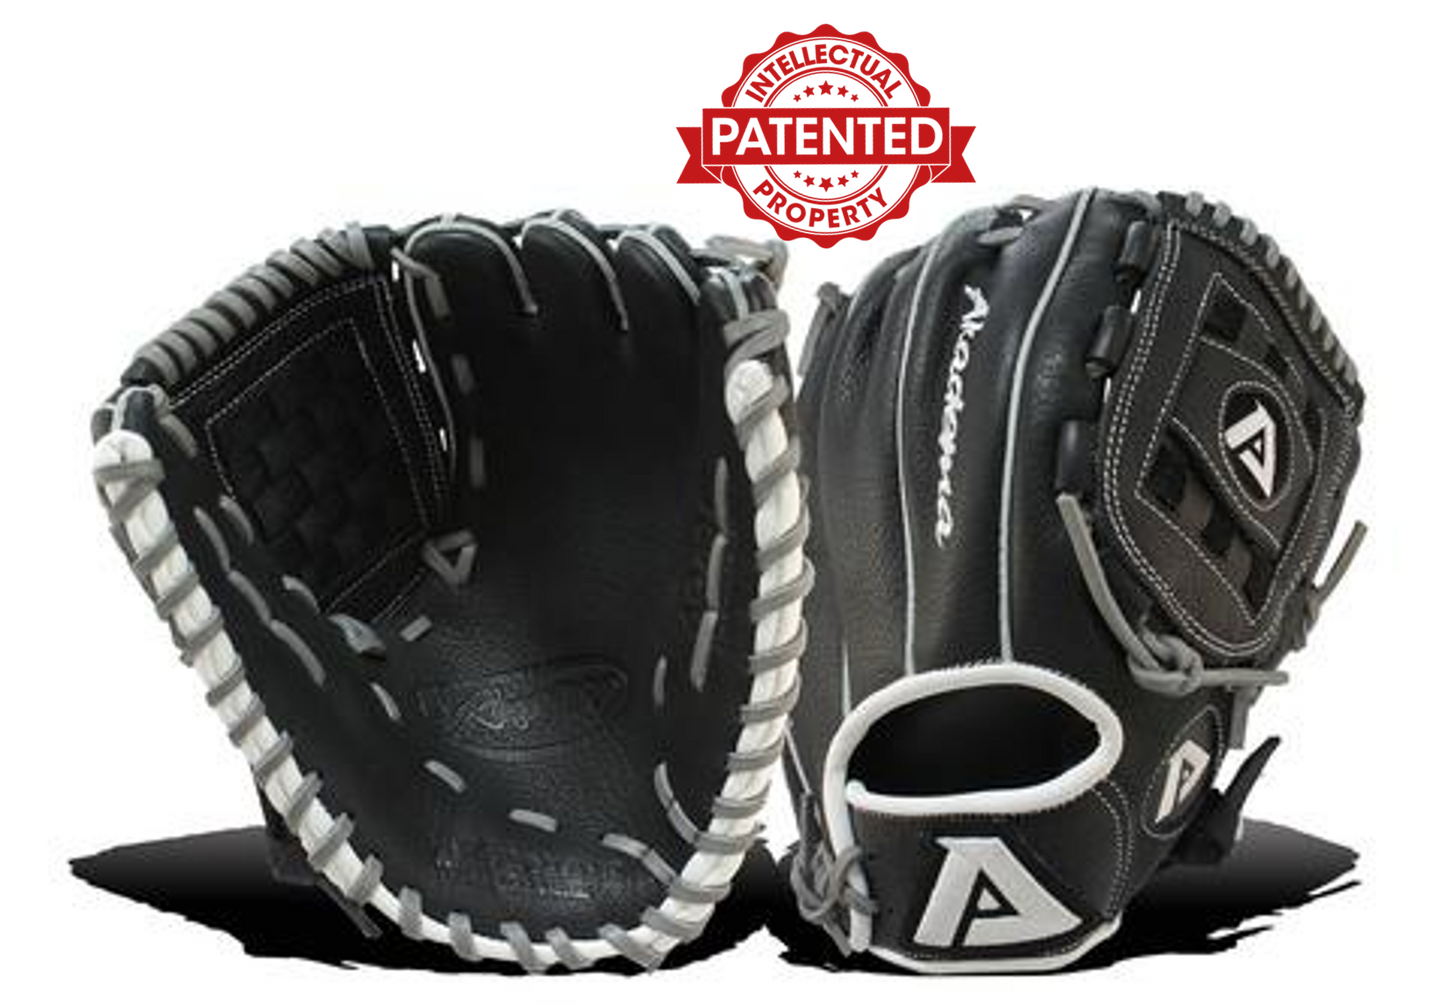 AOZ 91  (11.25 inch) Infield/Pitcher/Outfield